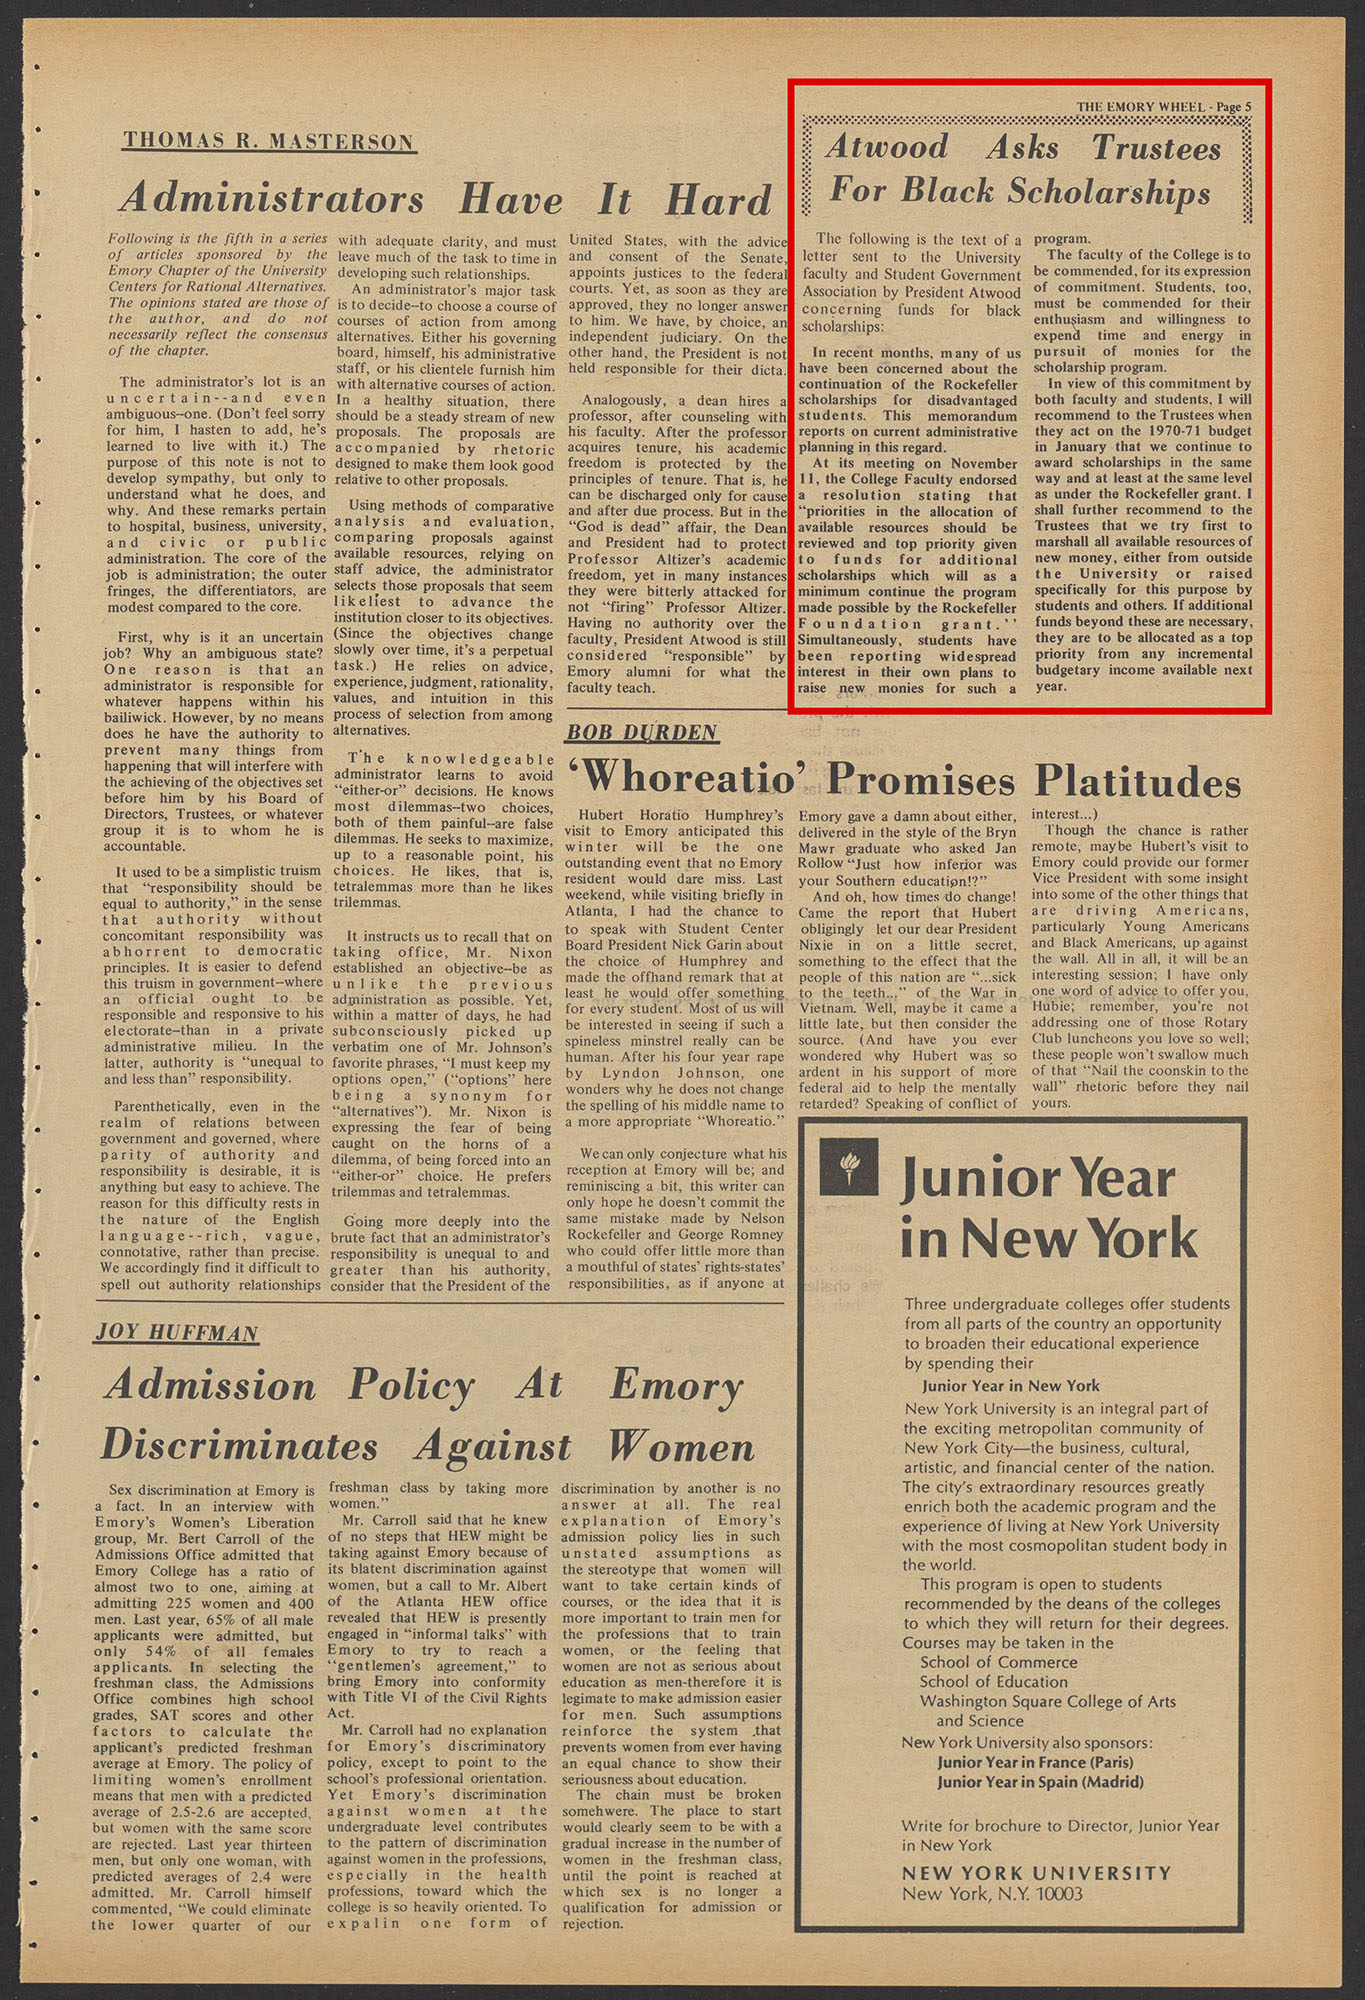 Emory Wheel newspaper page with article on President Atwood's letter to Trustees asking for Black student funding